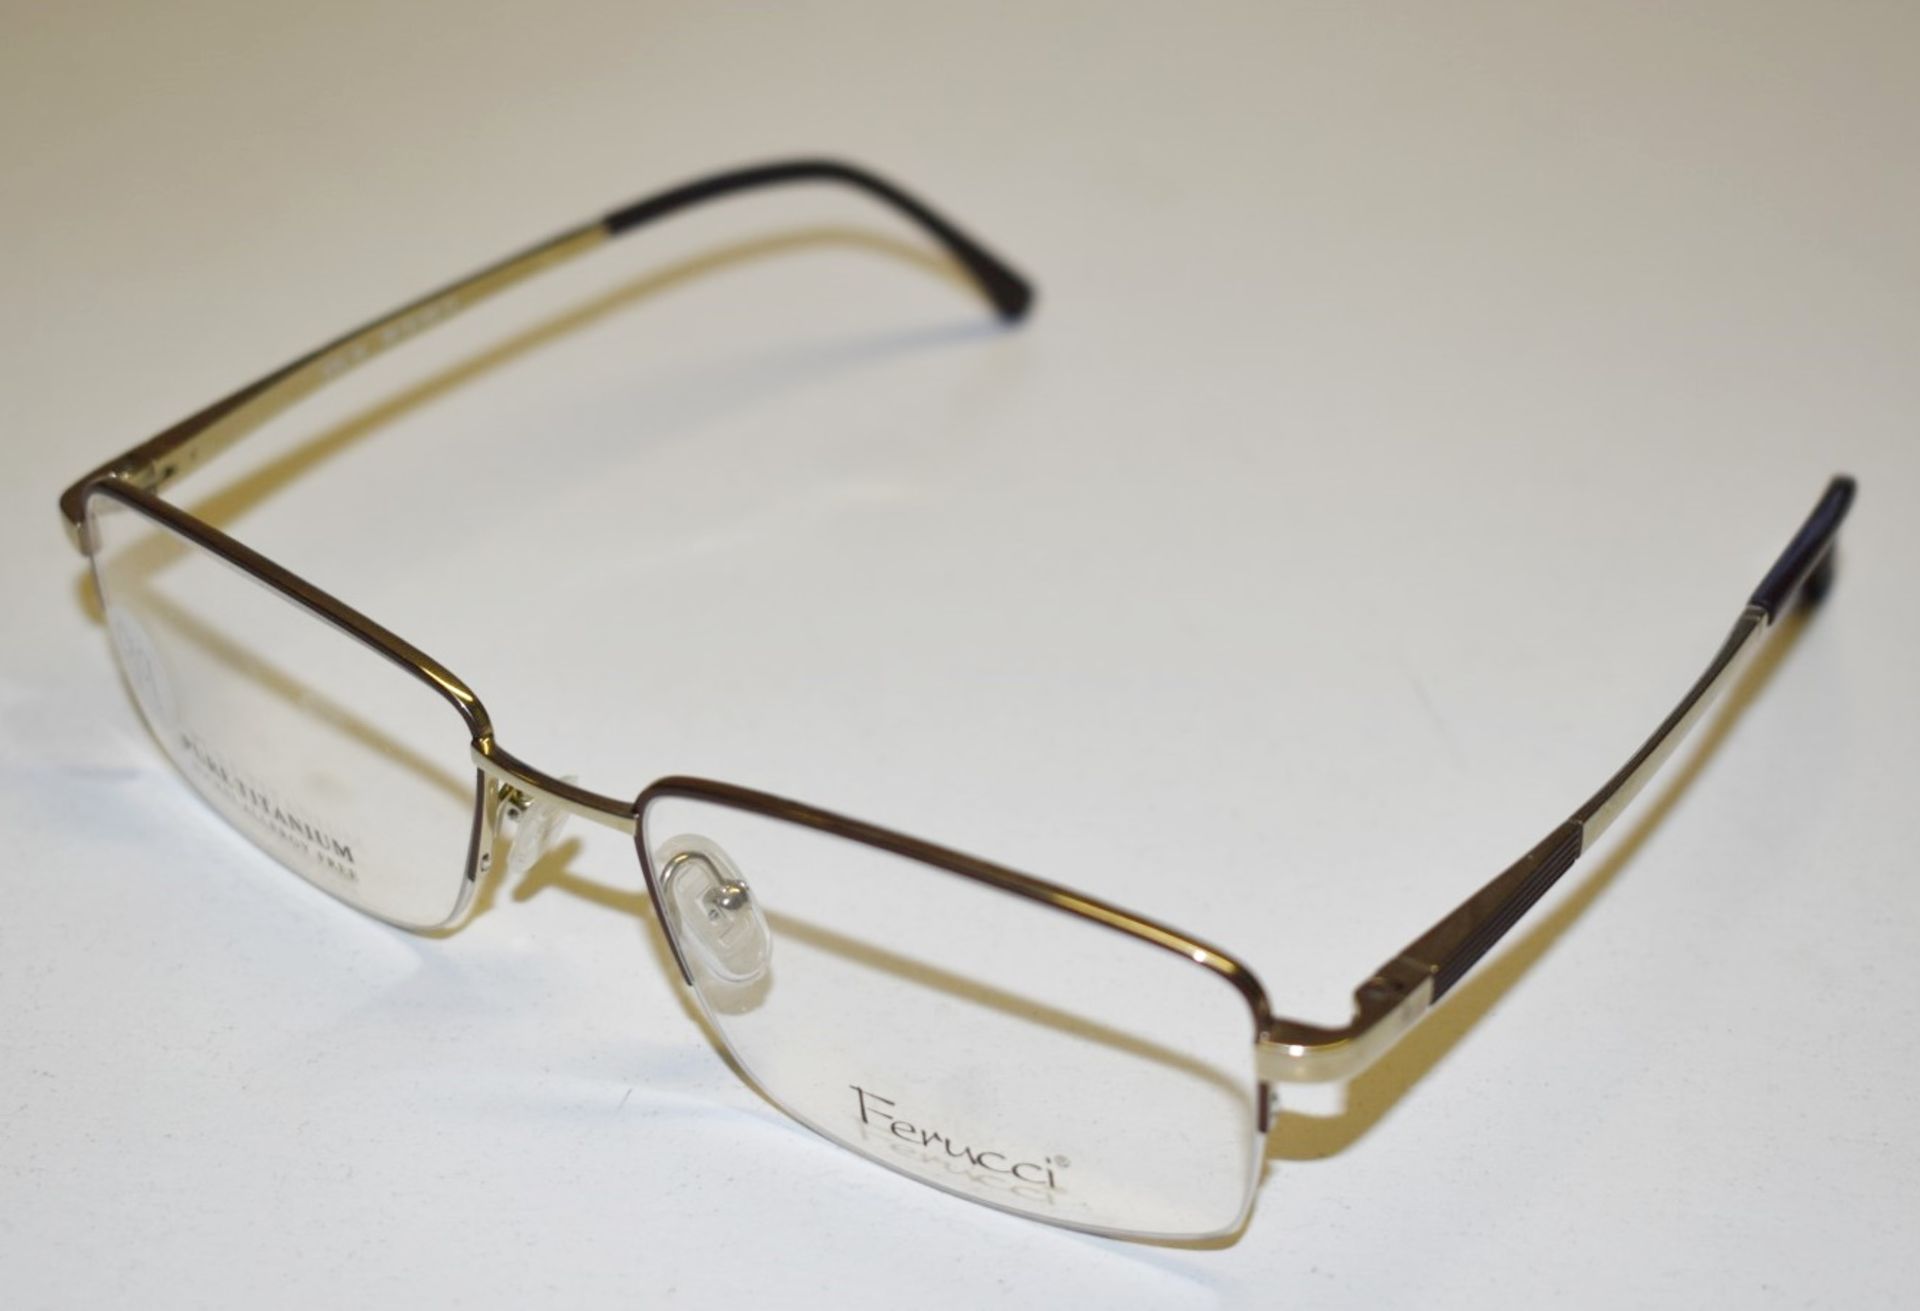 1 x Genuine FERUCCI Spectacle Eye Glasses Frame - Ex Display Stock  - Ref: GTI182 - CL645 - - Image 3 of 12